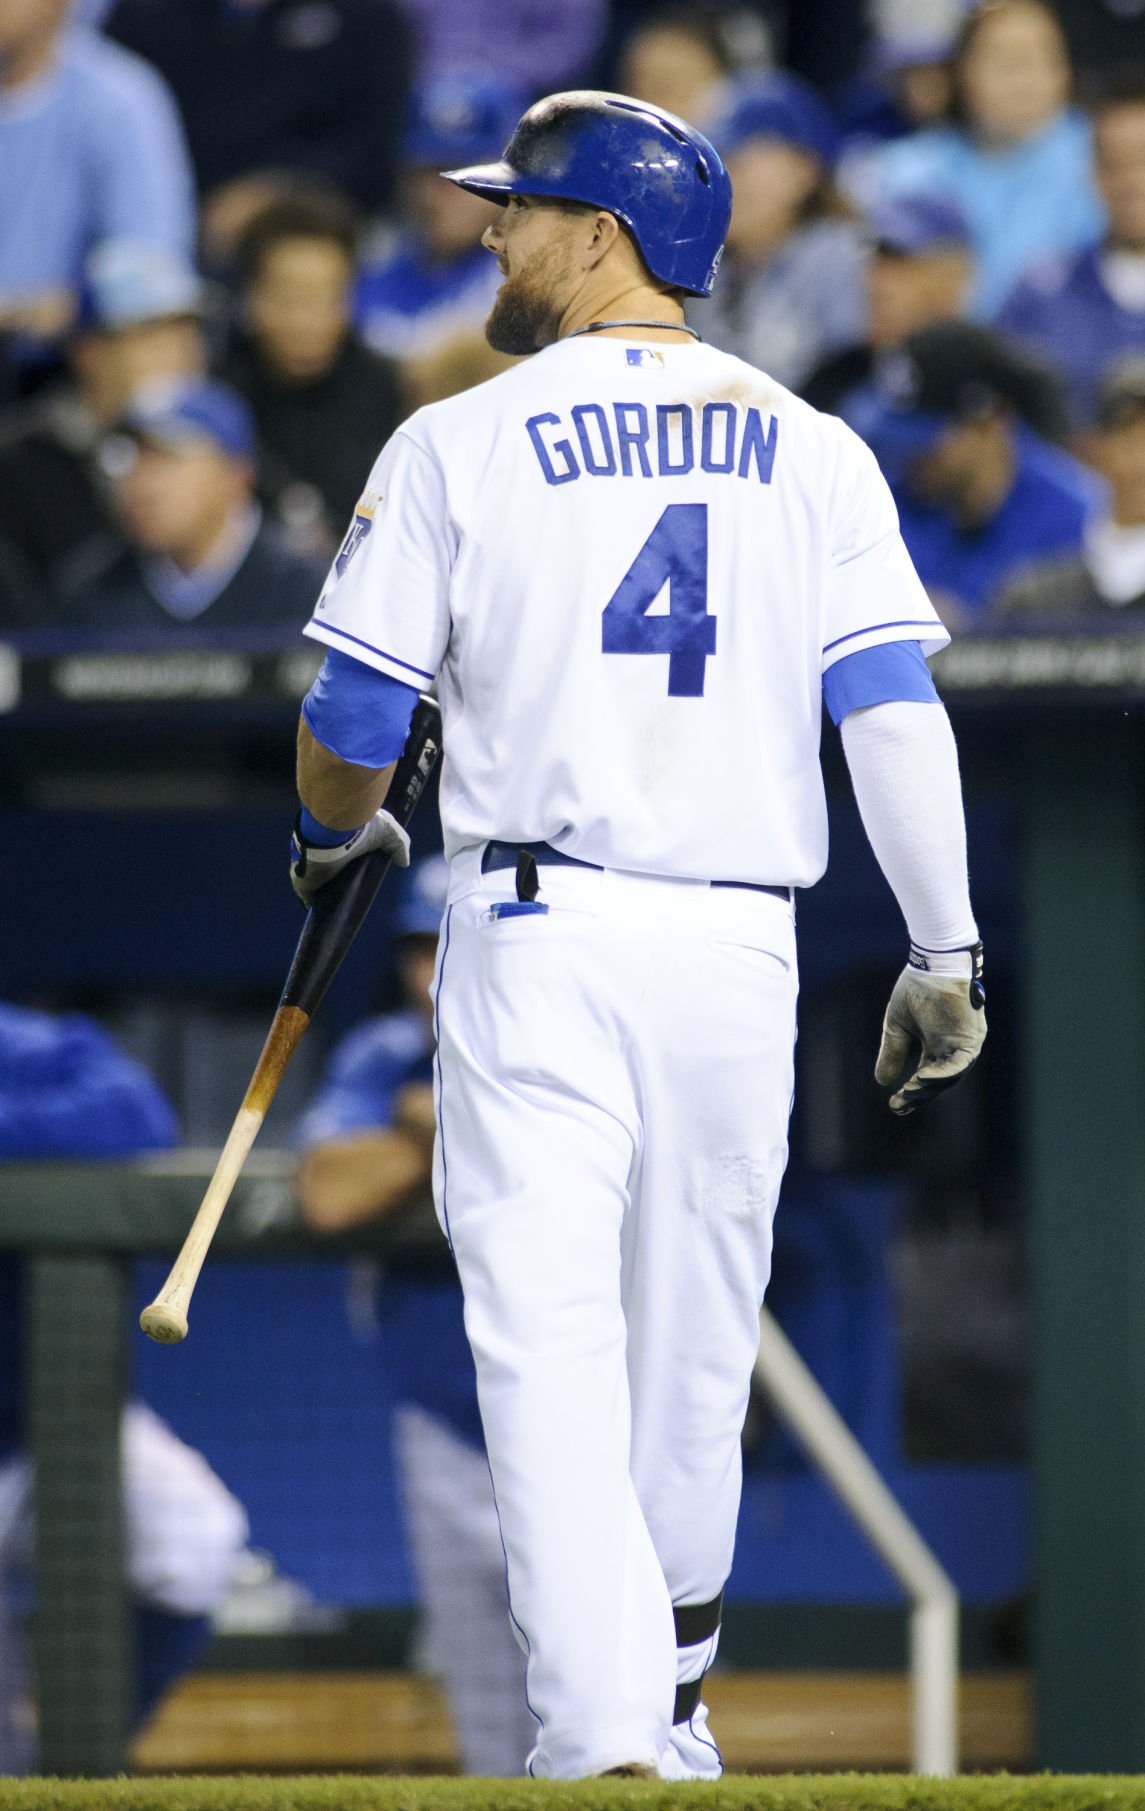 Why Dayton Moore believed it was important that Alex Gordon stayed in Royal  blue